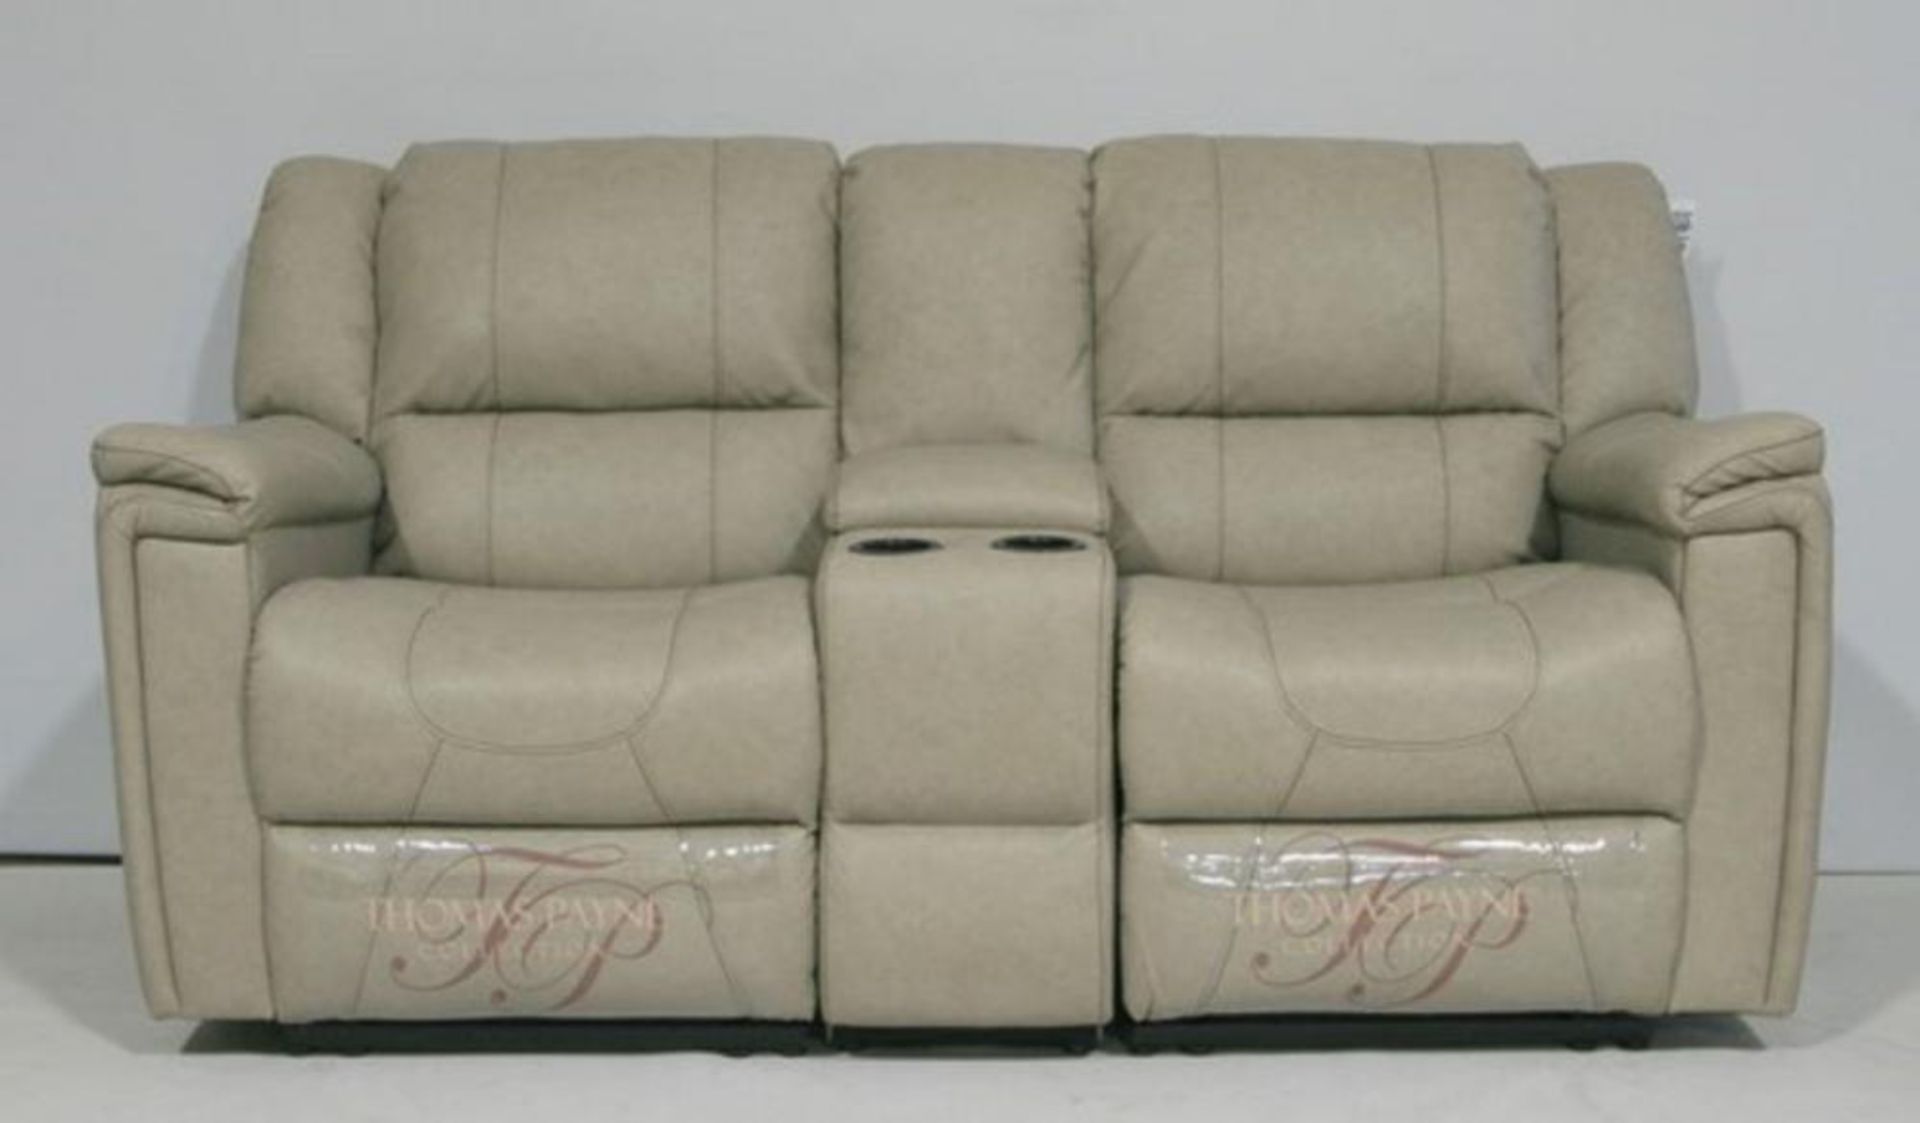 1 x Thomas Payne Reclining Wallhugger Theater Seating Love Seat Couch With Center Console and Grambl